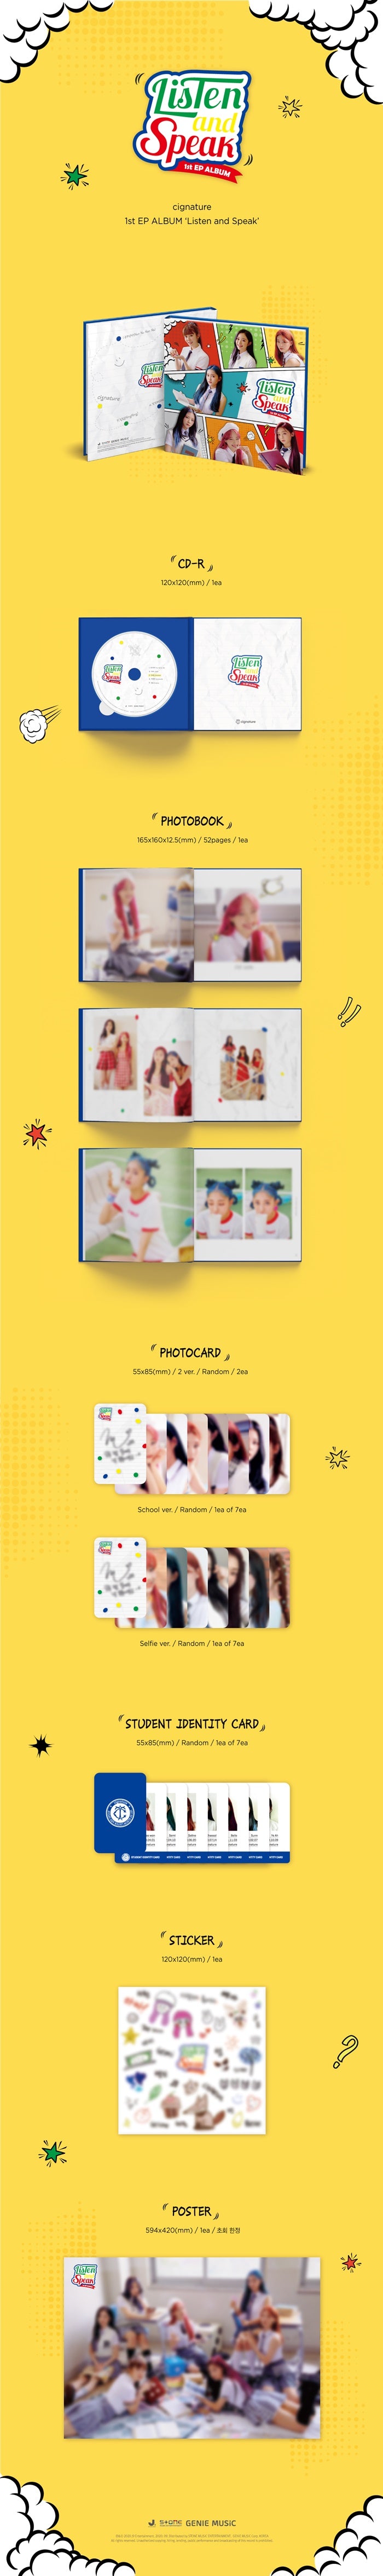 1 CD
1 Photo Book (52 pages)
2 Photo Cards
1 Student Identity Card
1 Sticker